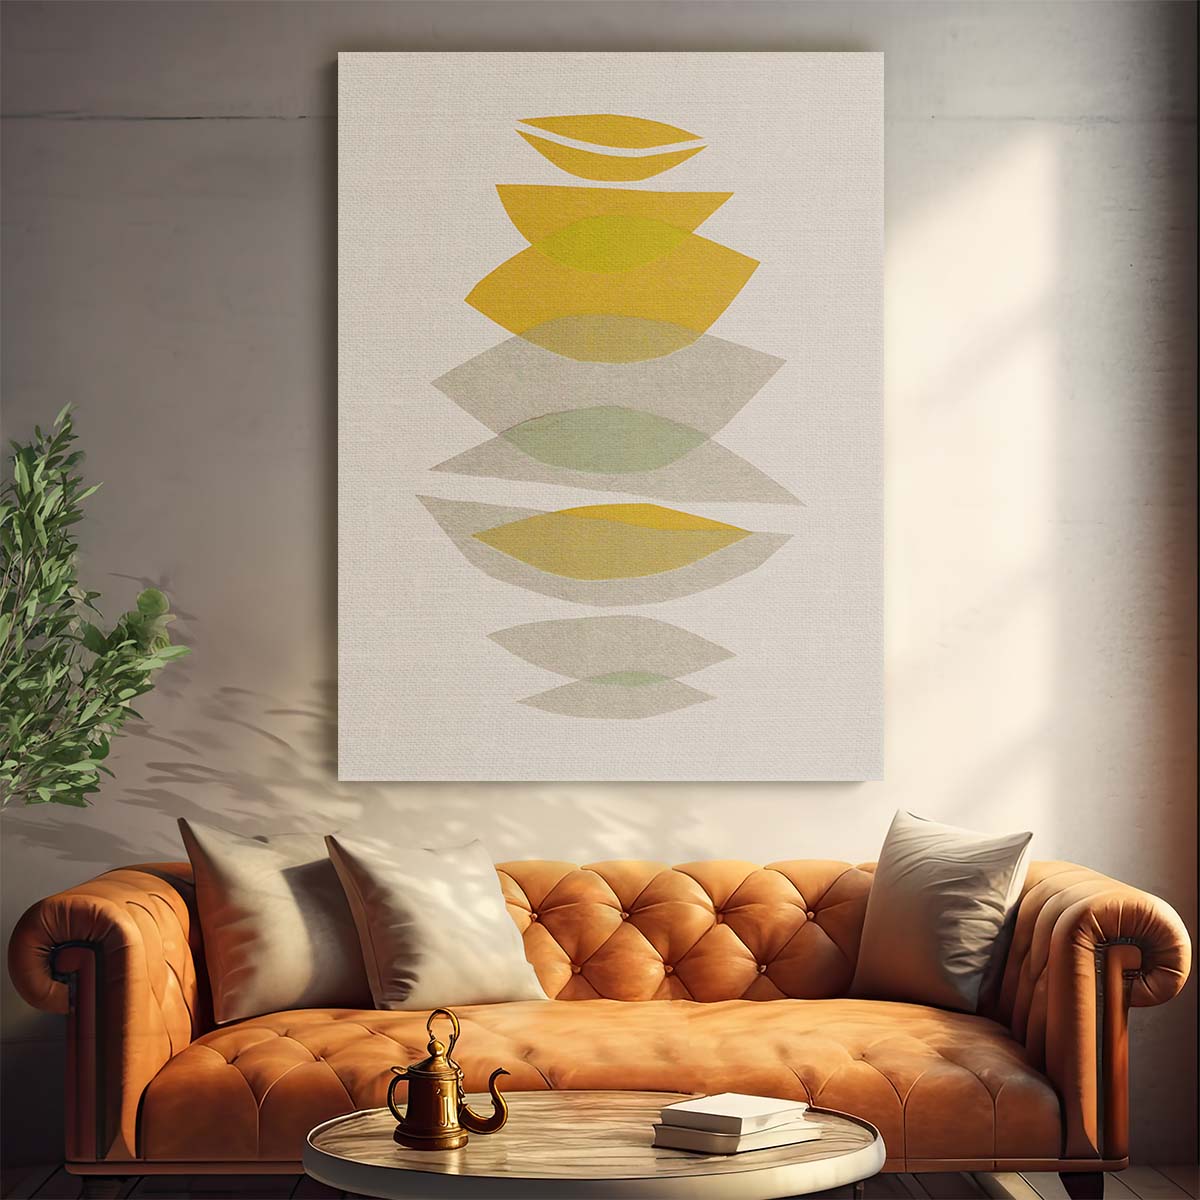 Playful Yellow Abstract Petals Boho Illustration in Collage Style by Luxuriance Designs, made in USA